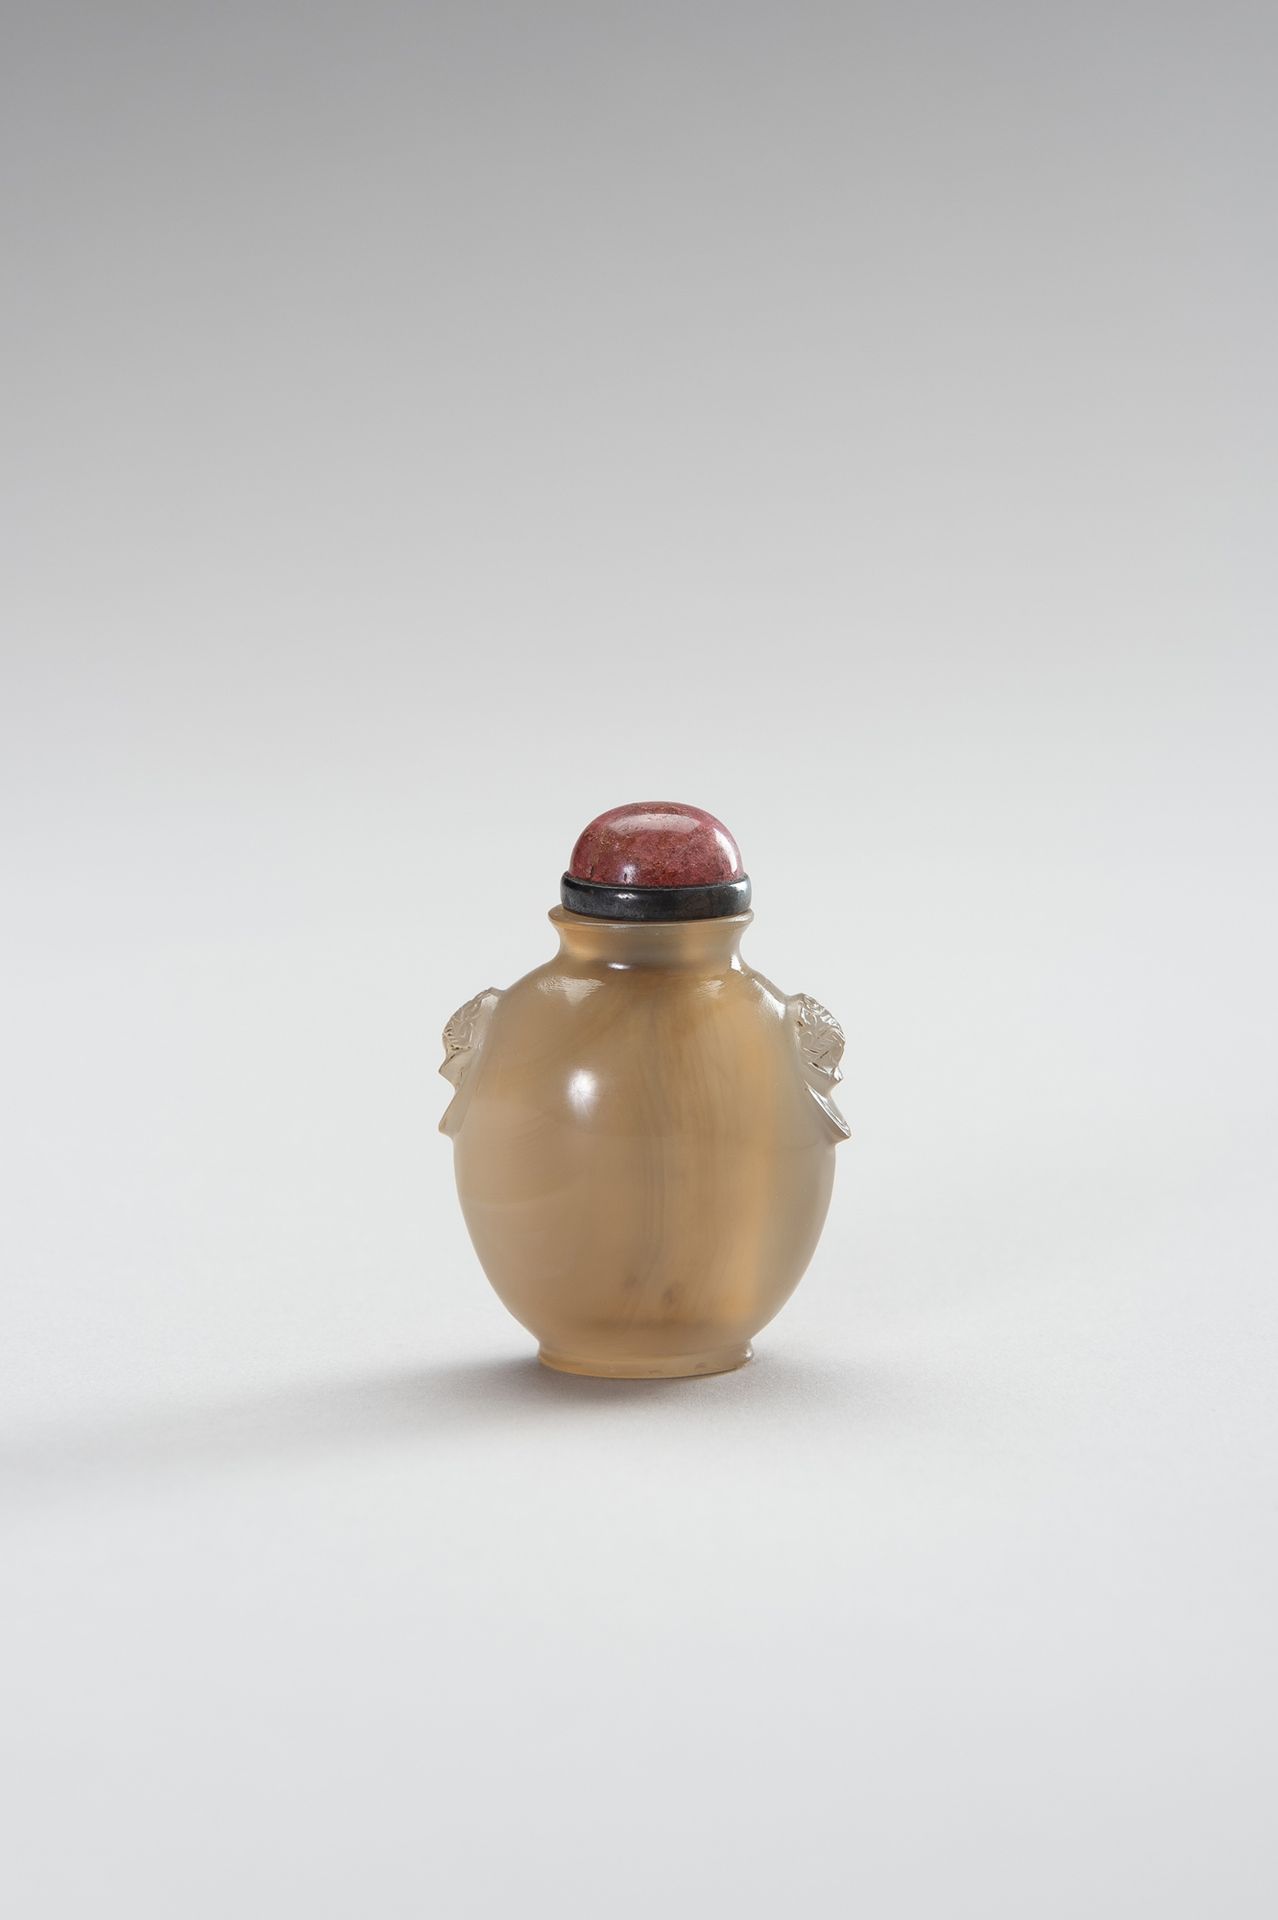 AN AGATE LADY’S SNUFF BOTTLE AN AGATE LADY’S SNUFF BOTTLE
China, Qing Dynasty (1&hellip;